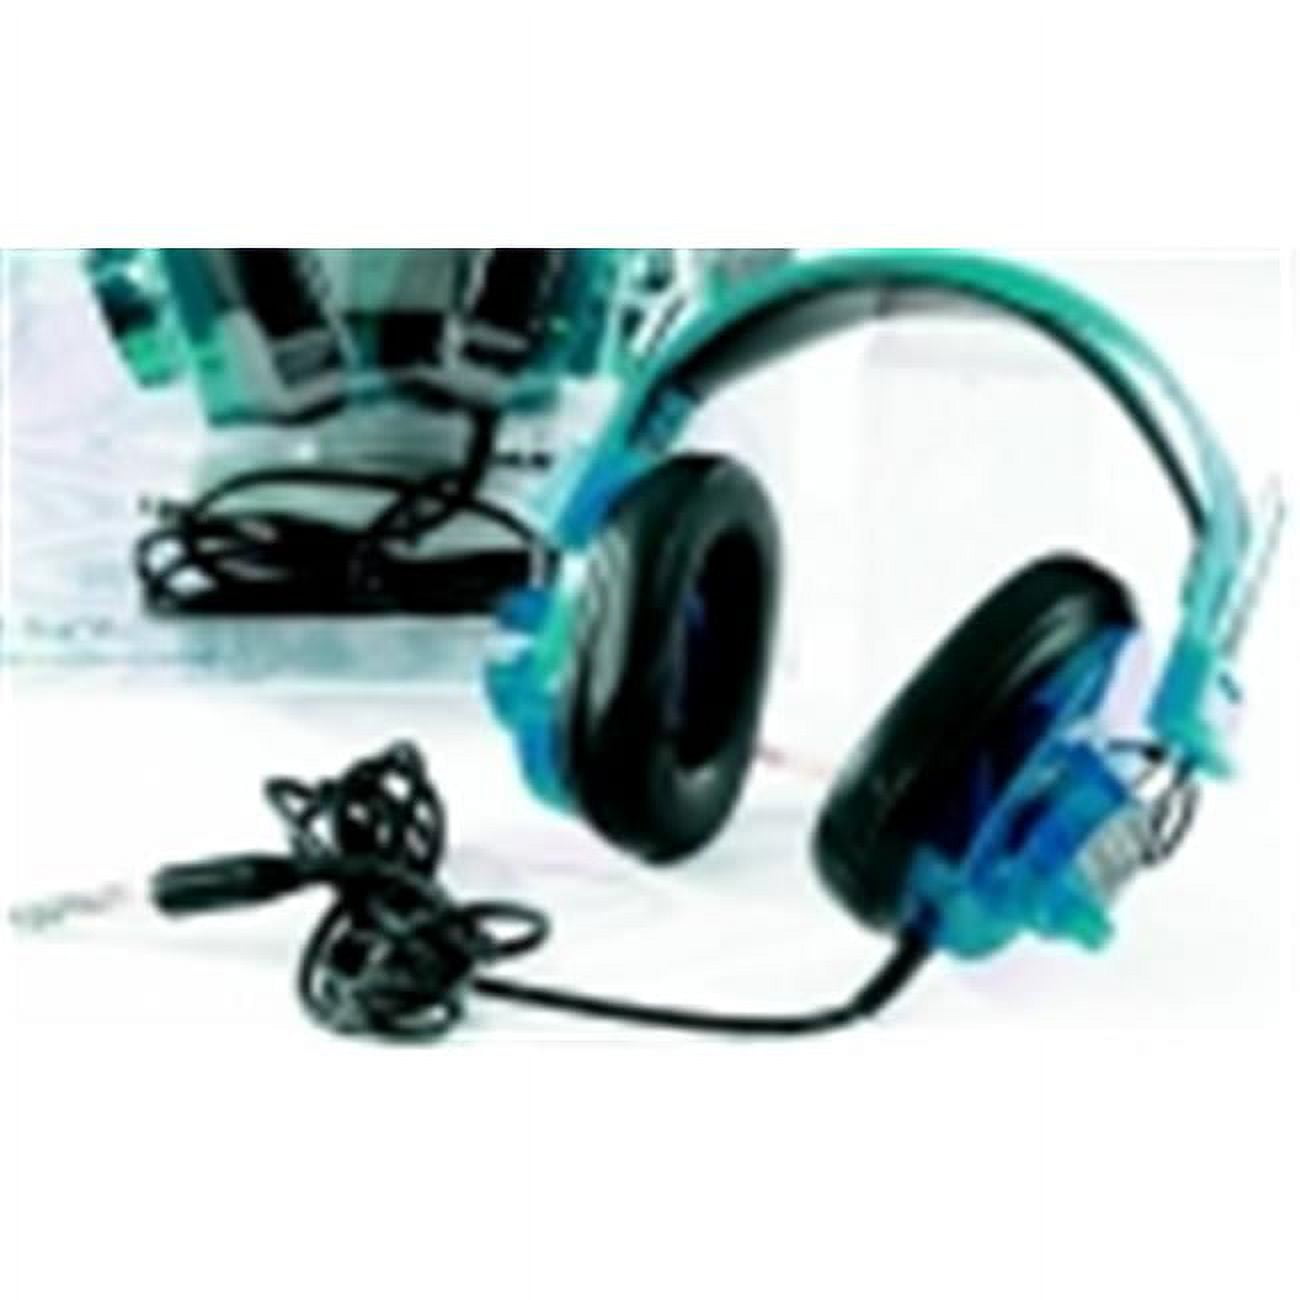 Califone Deluxe Stereo Headset, Blueberry